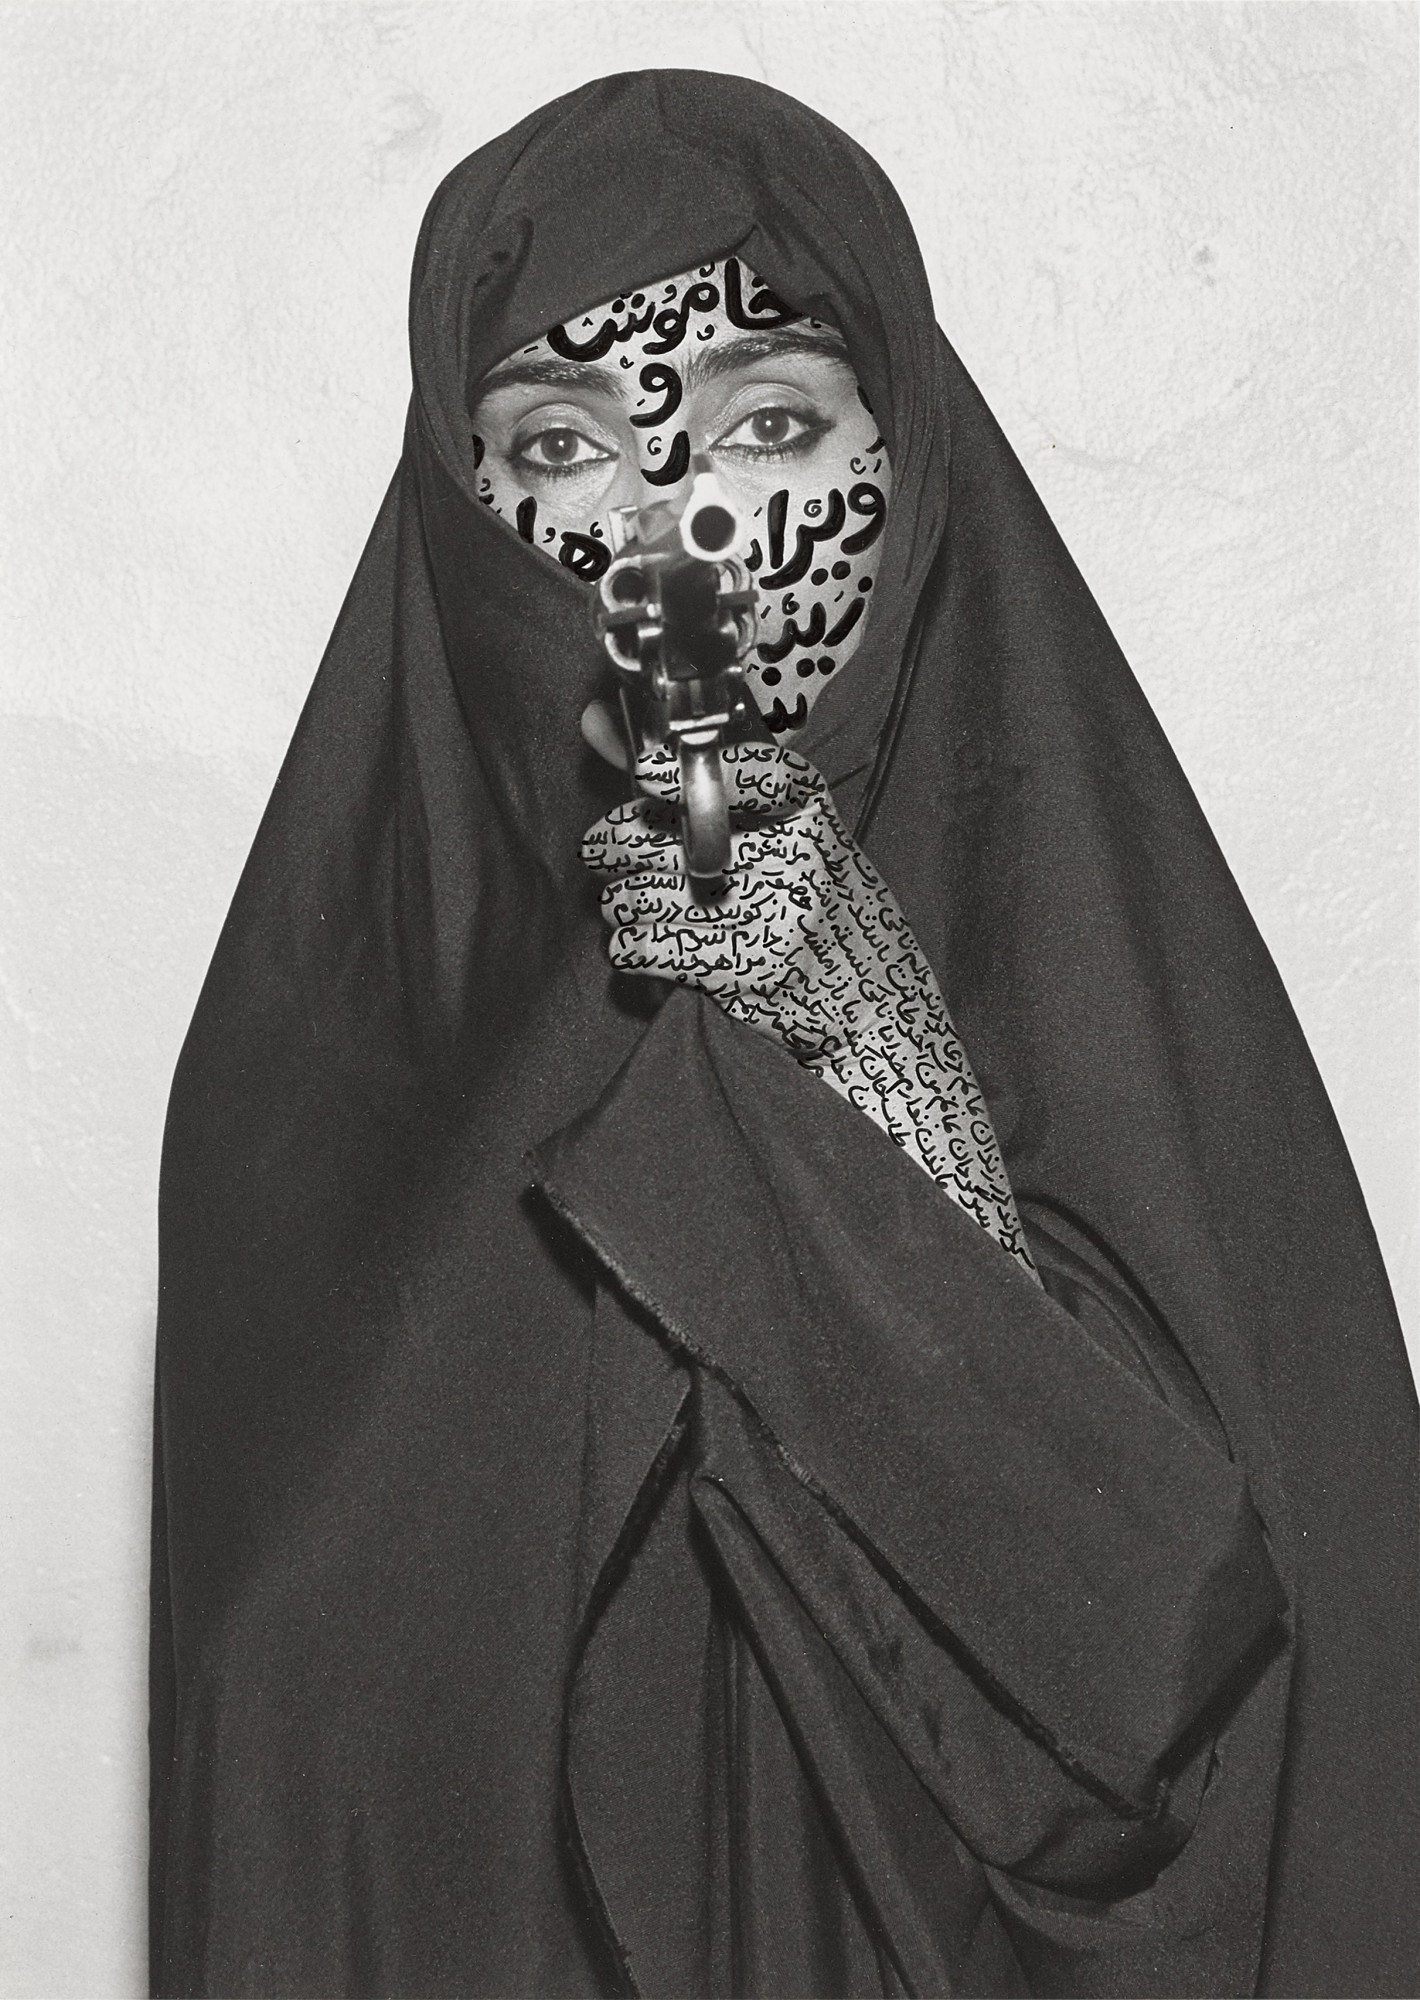 Shirin Neshat, Faceless, Women of Allah series, 1994, ink and black and white print on RC paper (courtesy Barbara Gladstone Gallery, New York and Brussels) © Shirin Neshat